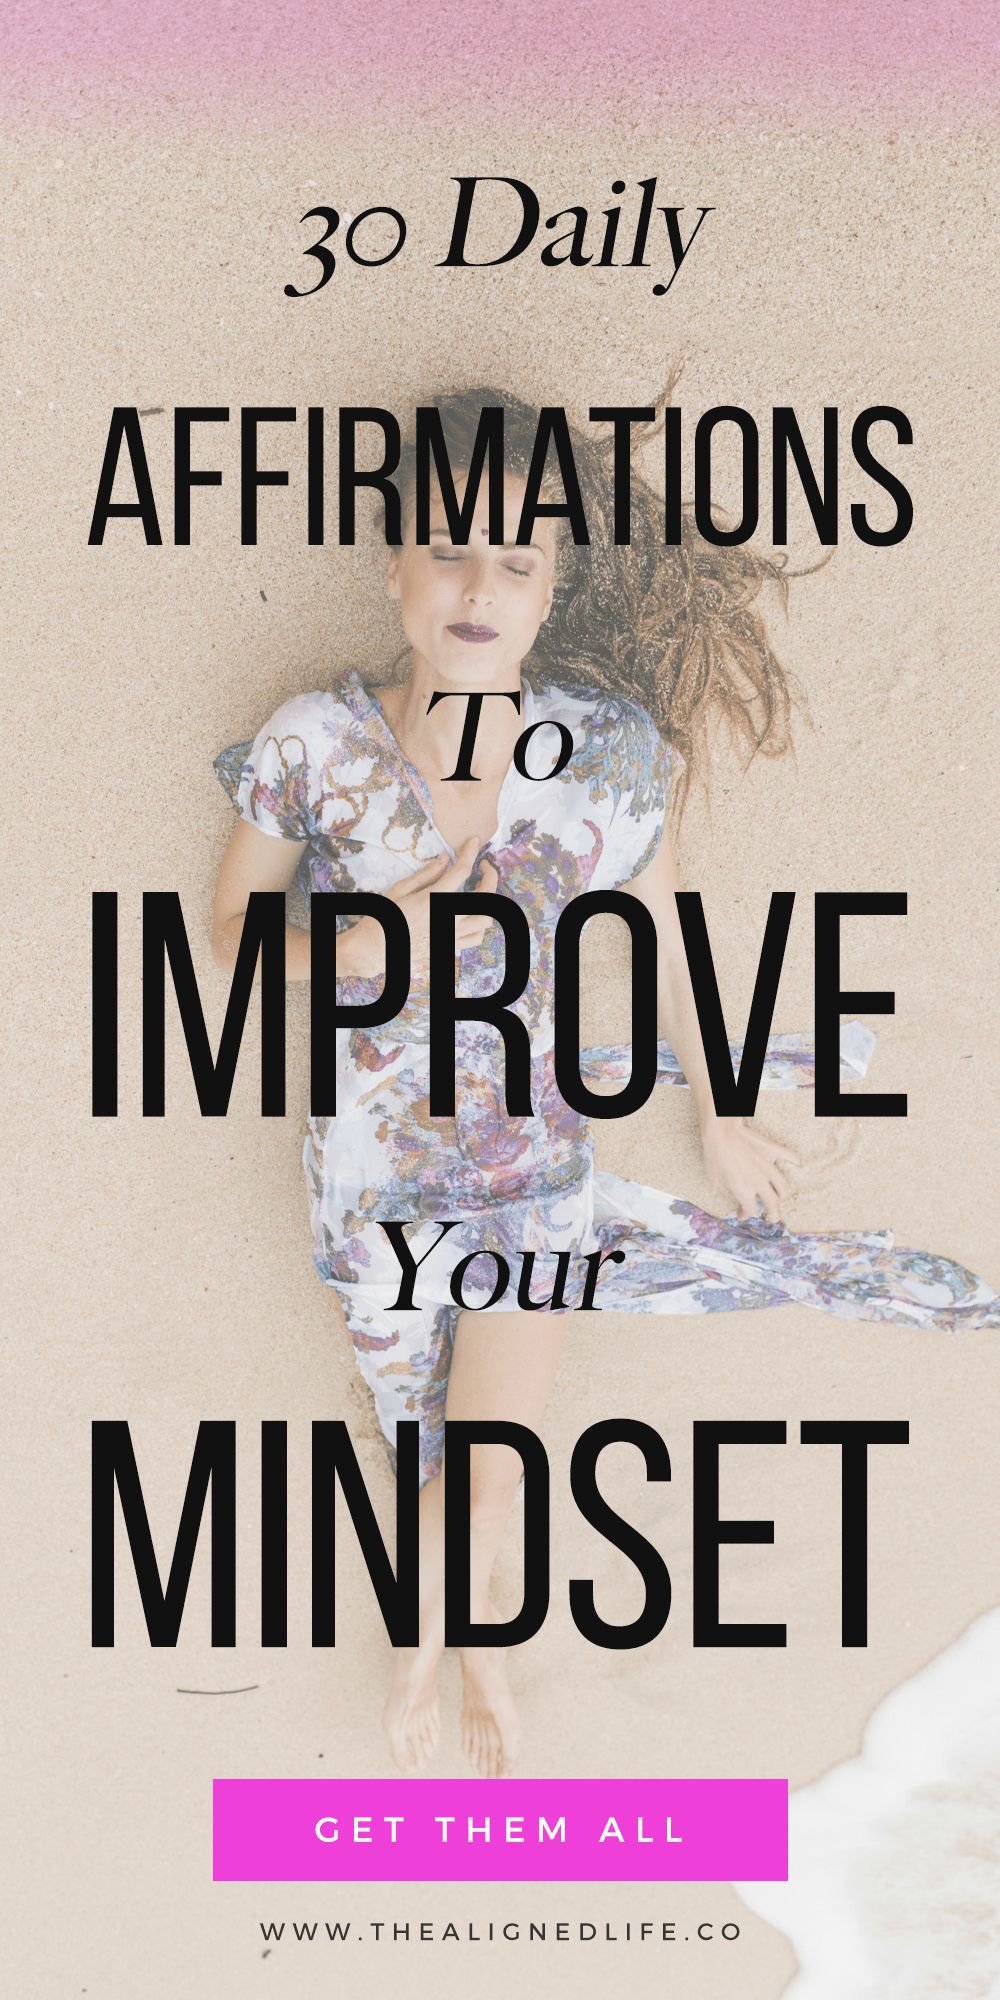 girl lying on the sand with text 30 Daily Affirmations To Improve Your Mindset